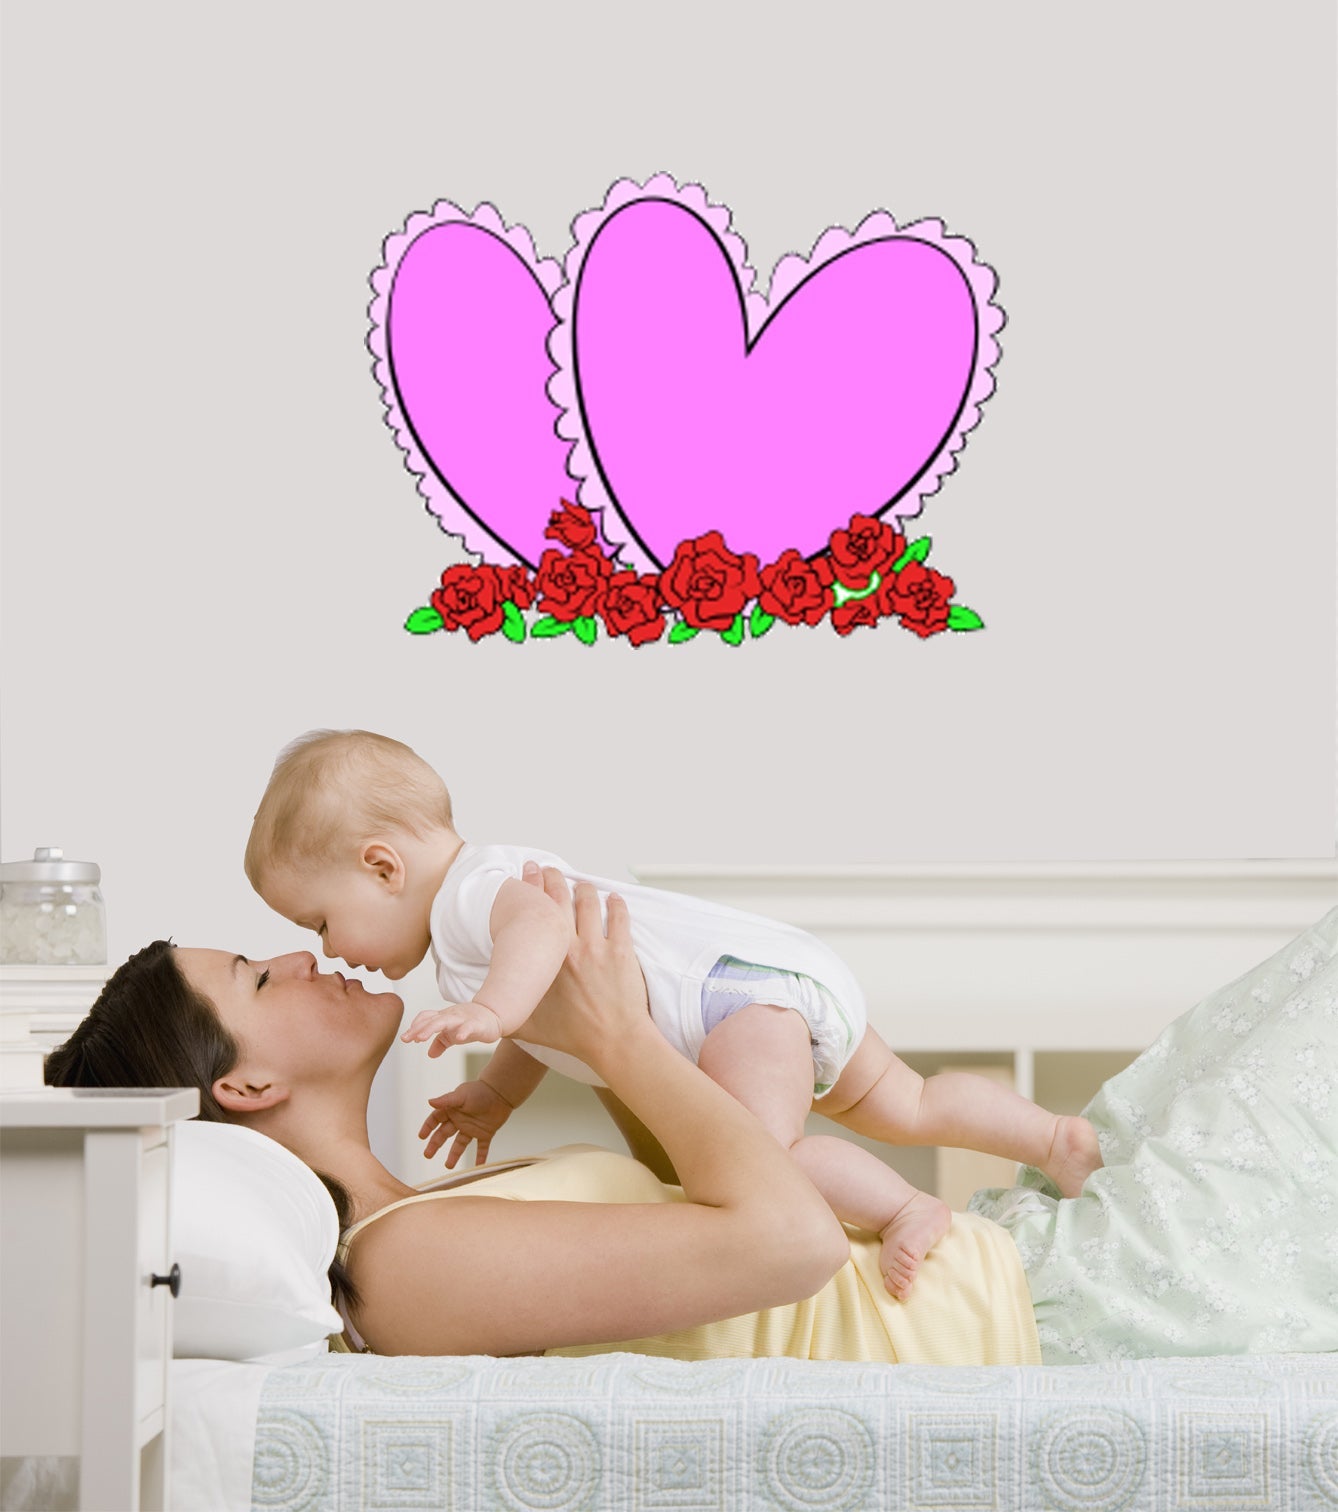 Valentines - Hearts Wall Decal Cutouts Installed